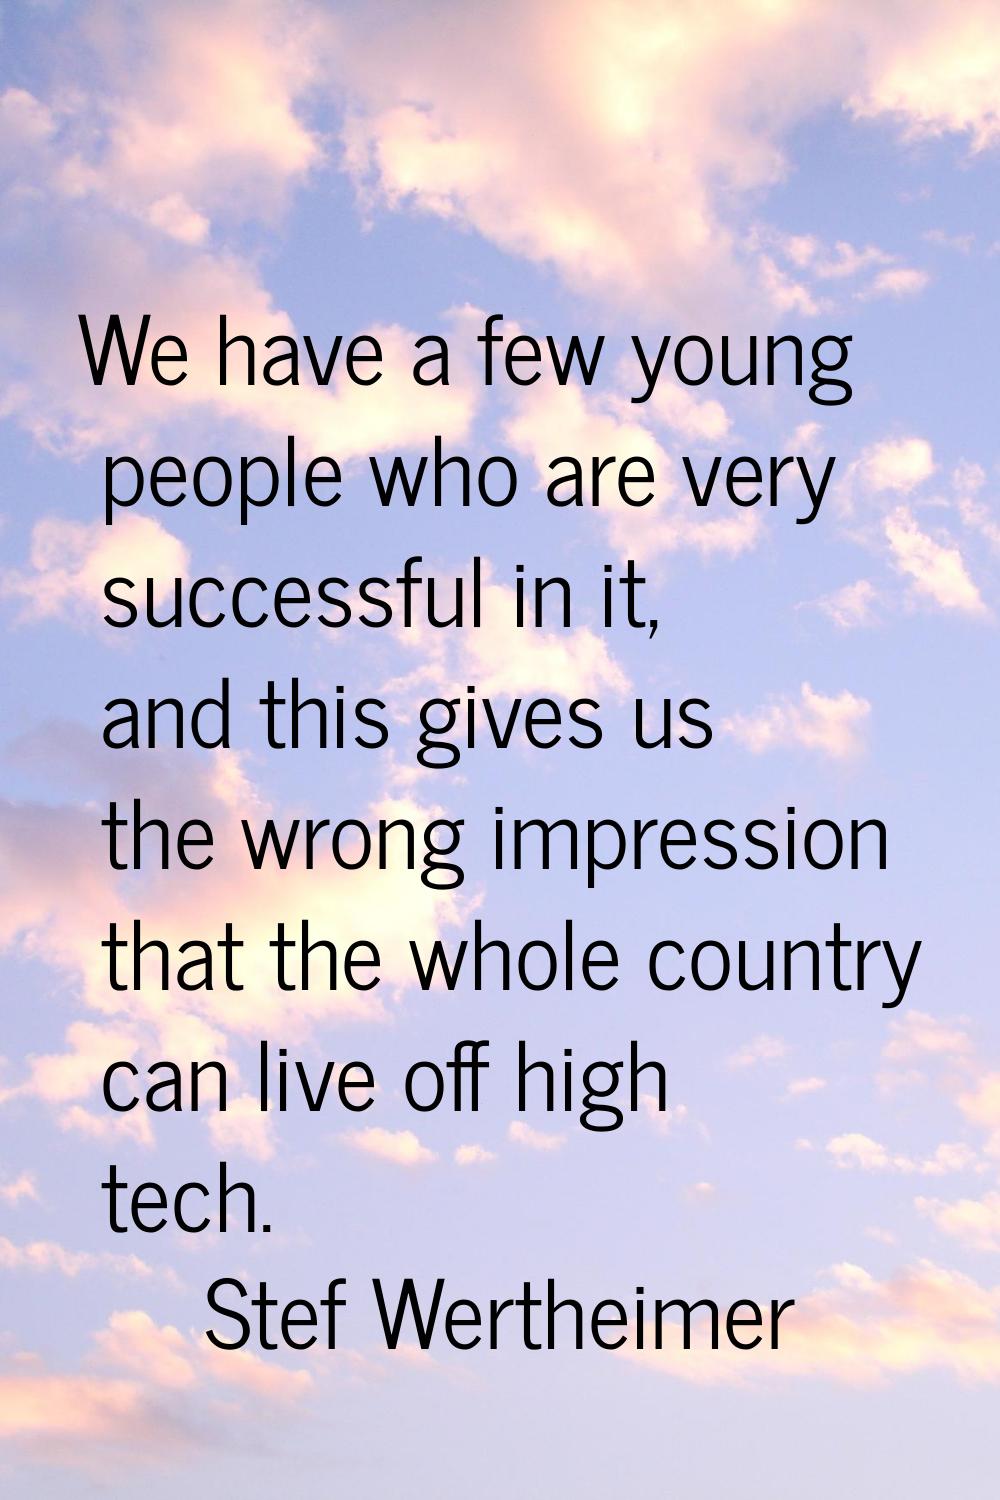 We have a few young people who are very successful in it, and this gives us the wrong impression th